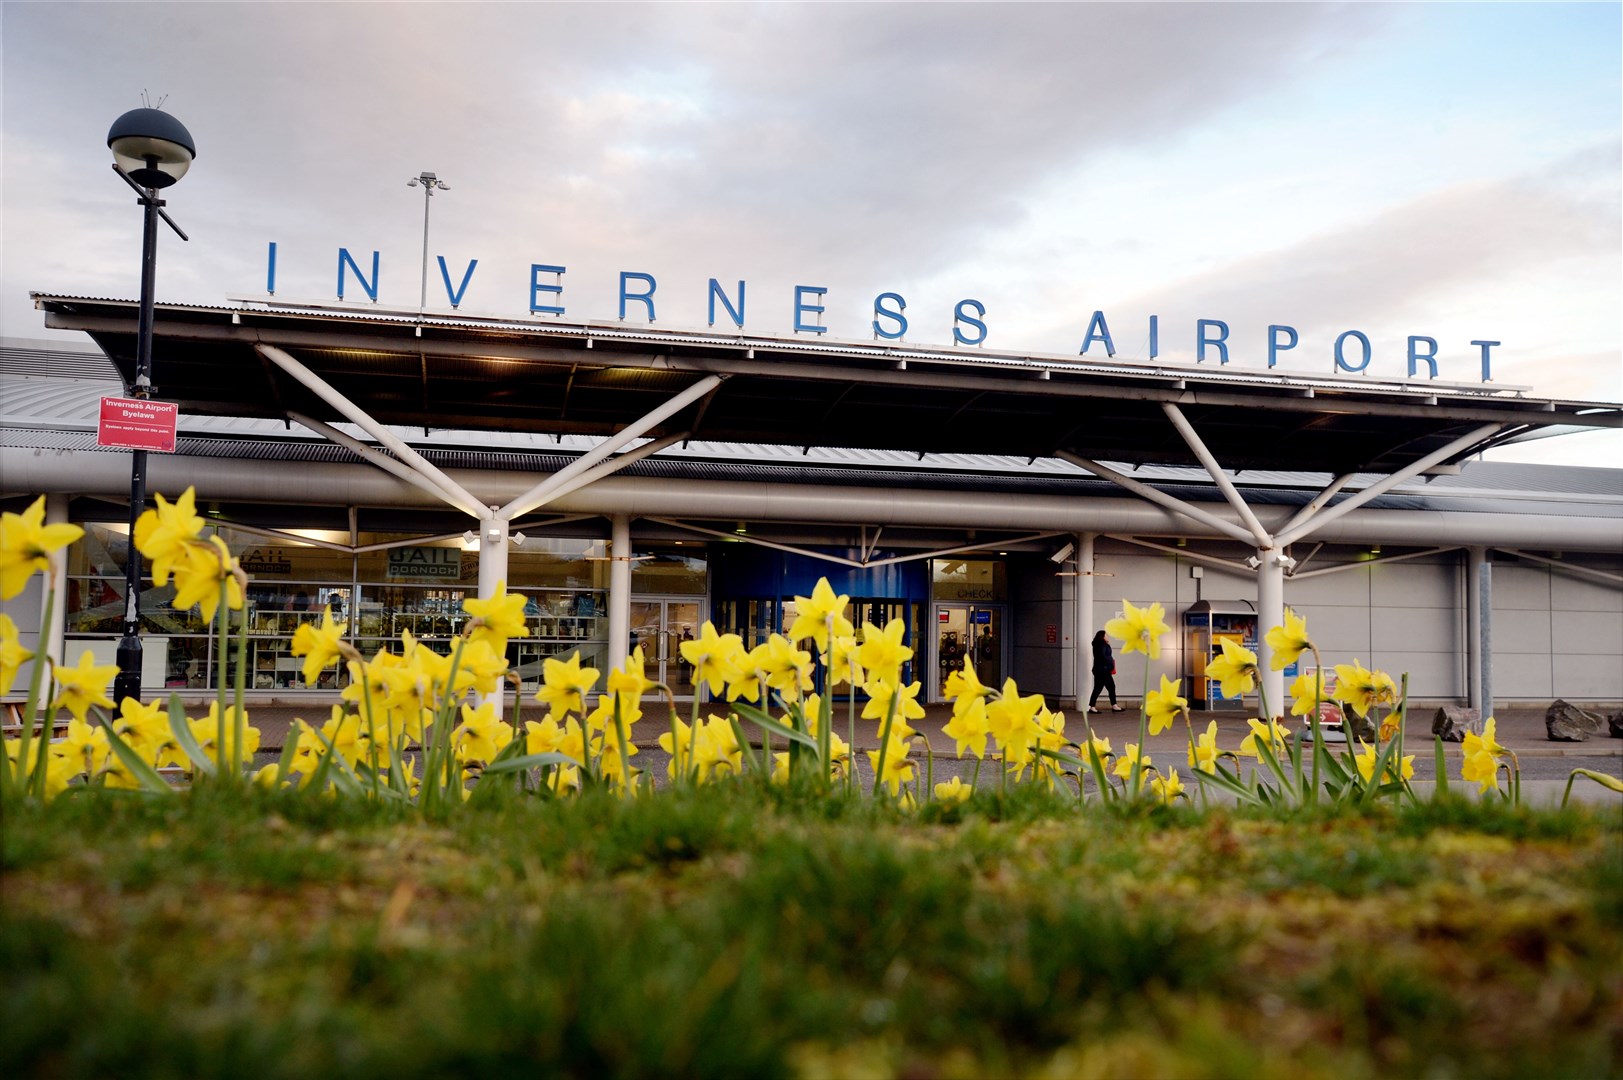 Inverness Airport has been hit by disruption during the dispute.